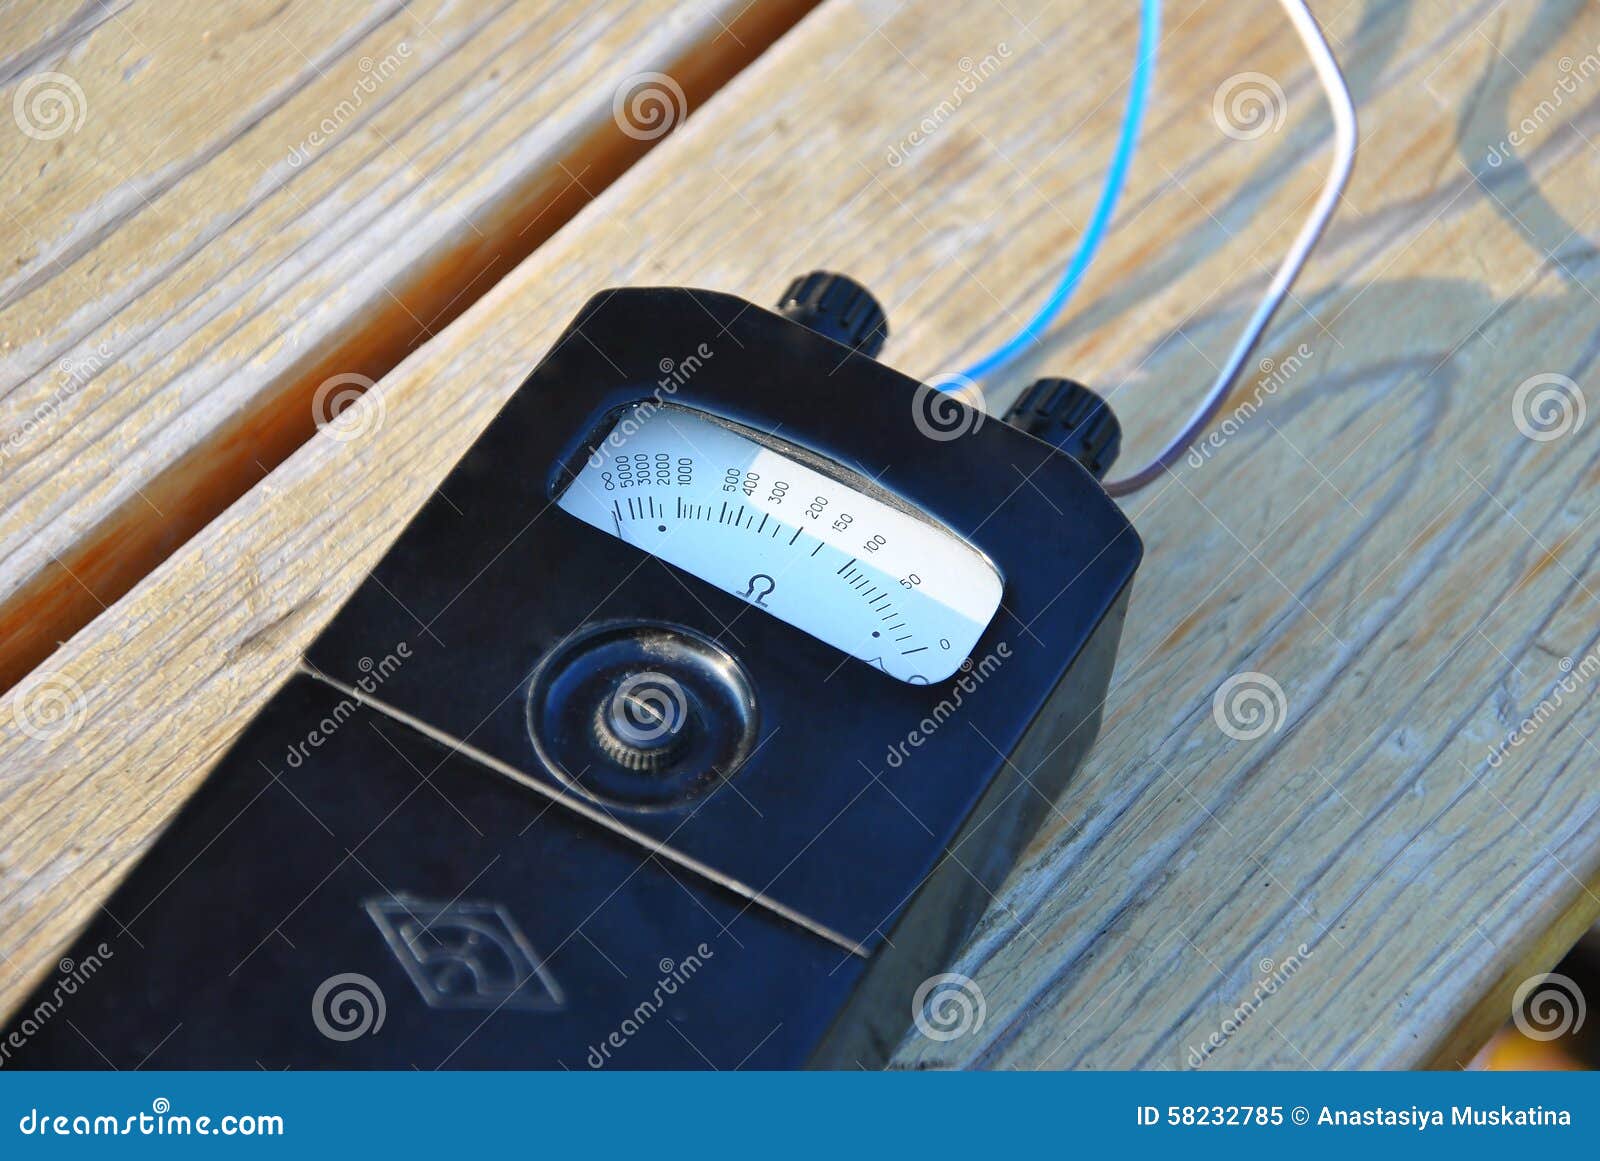 https://thumbs.dreamstime.com/z/old-ohmmeter-white-pointer-indicator-connection-wires-58232785.jpg